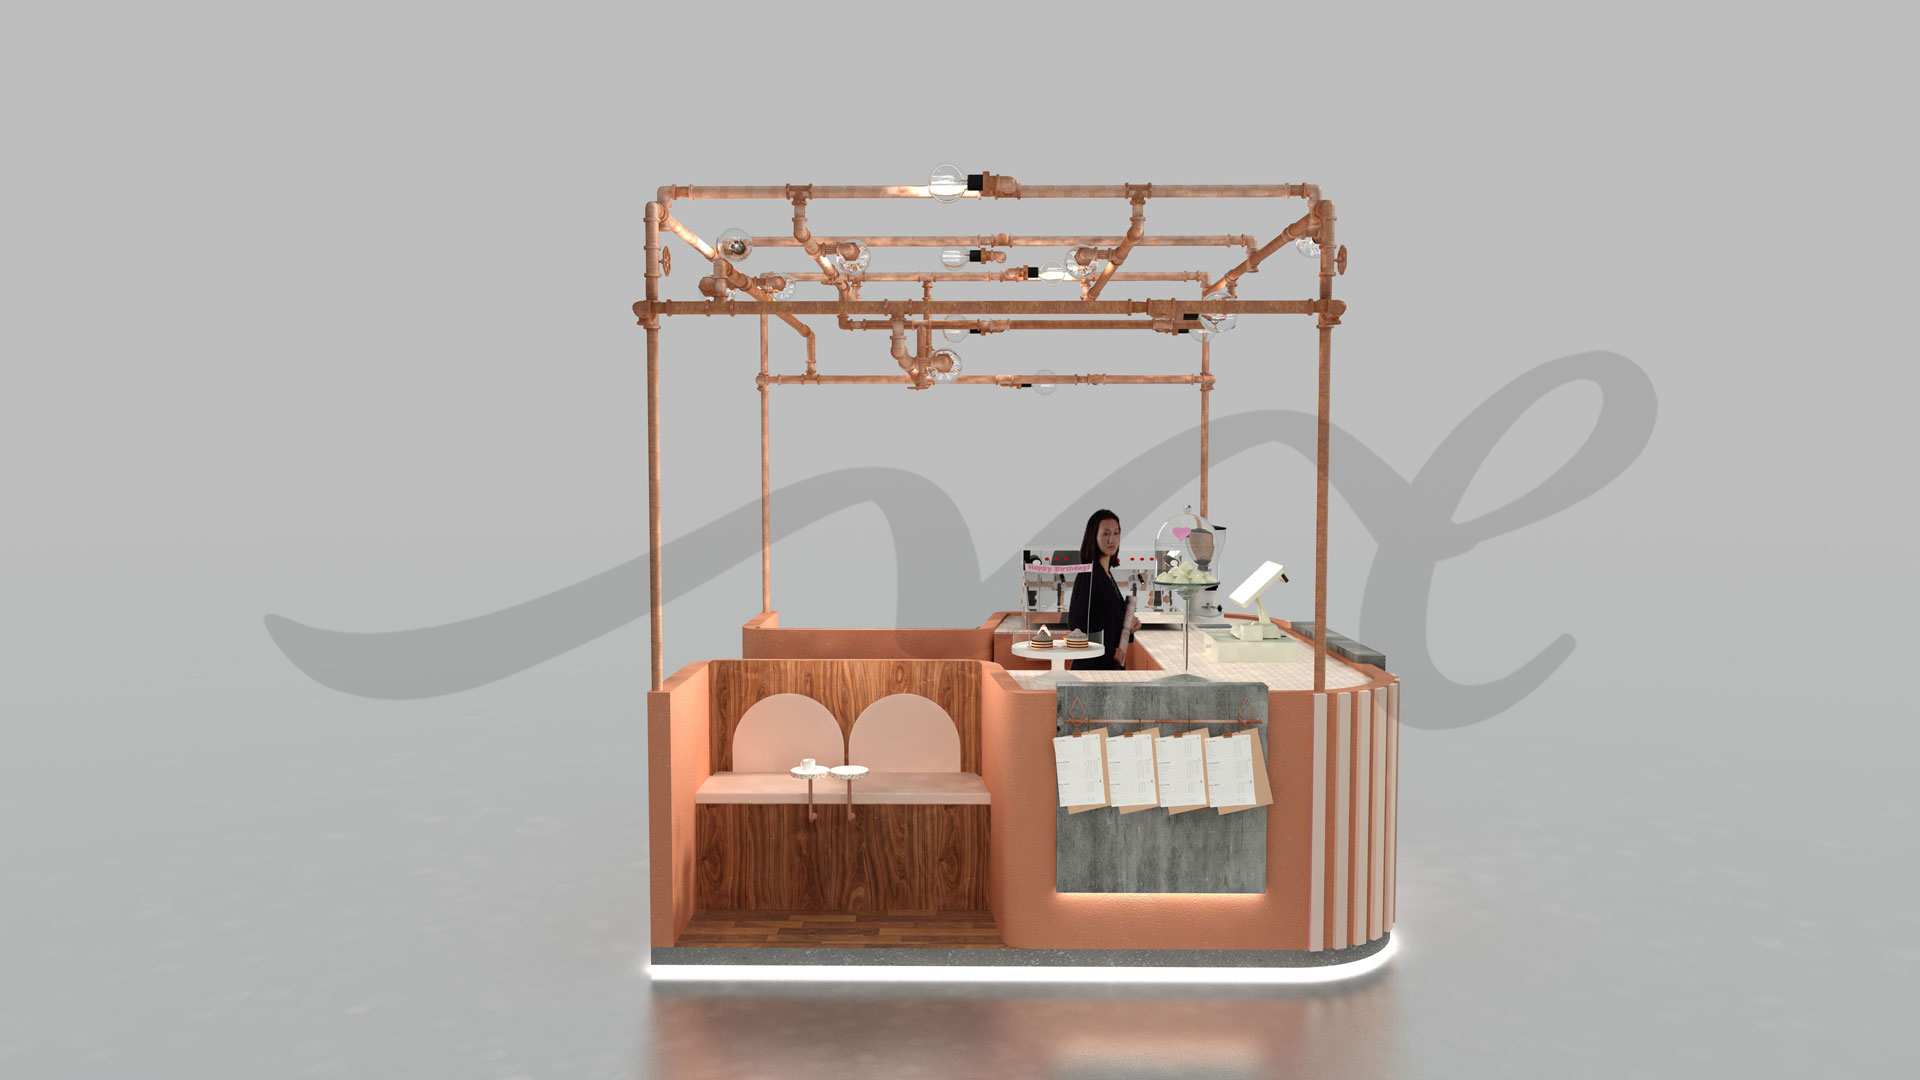 3D Design of a Coffee Kiosk for 2 Côtés made by ME Visual